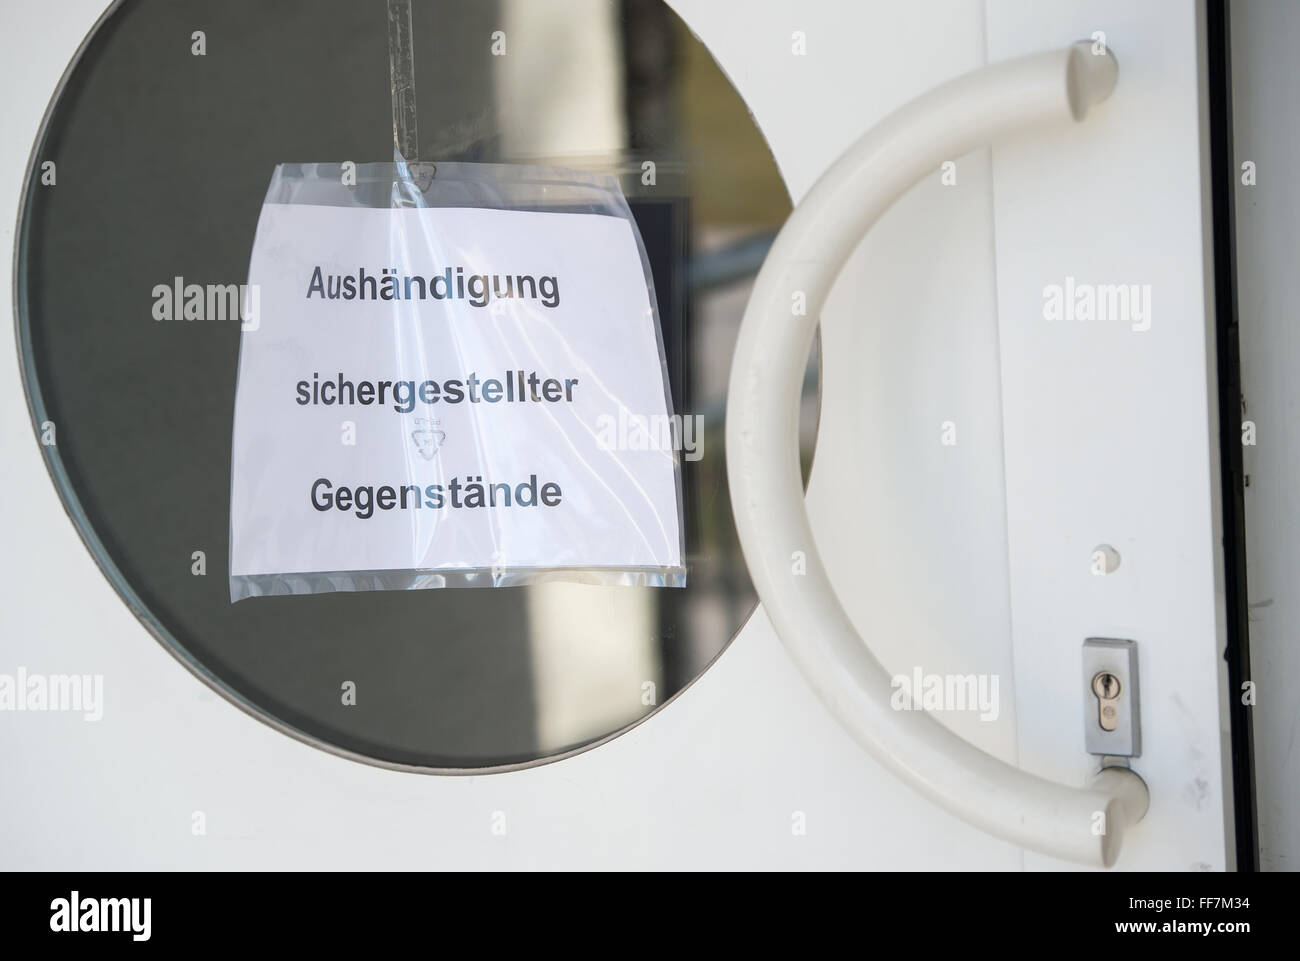 'Delivery of items' can be read on a sign on a door where personal belongings from the train crash on 09 February are set out for pick-up in a locker room at the Kolbermoore Volunteer Fire Department near Bad Aibling, Germany, 11 February 2016. The things can be picked up on 11 February 2016 between 1 and 4PM and on 12 February 2016 between 9AM and 12PM. Photo: PETER KNEFFEL/dpa Stock Photo